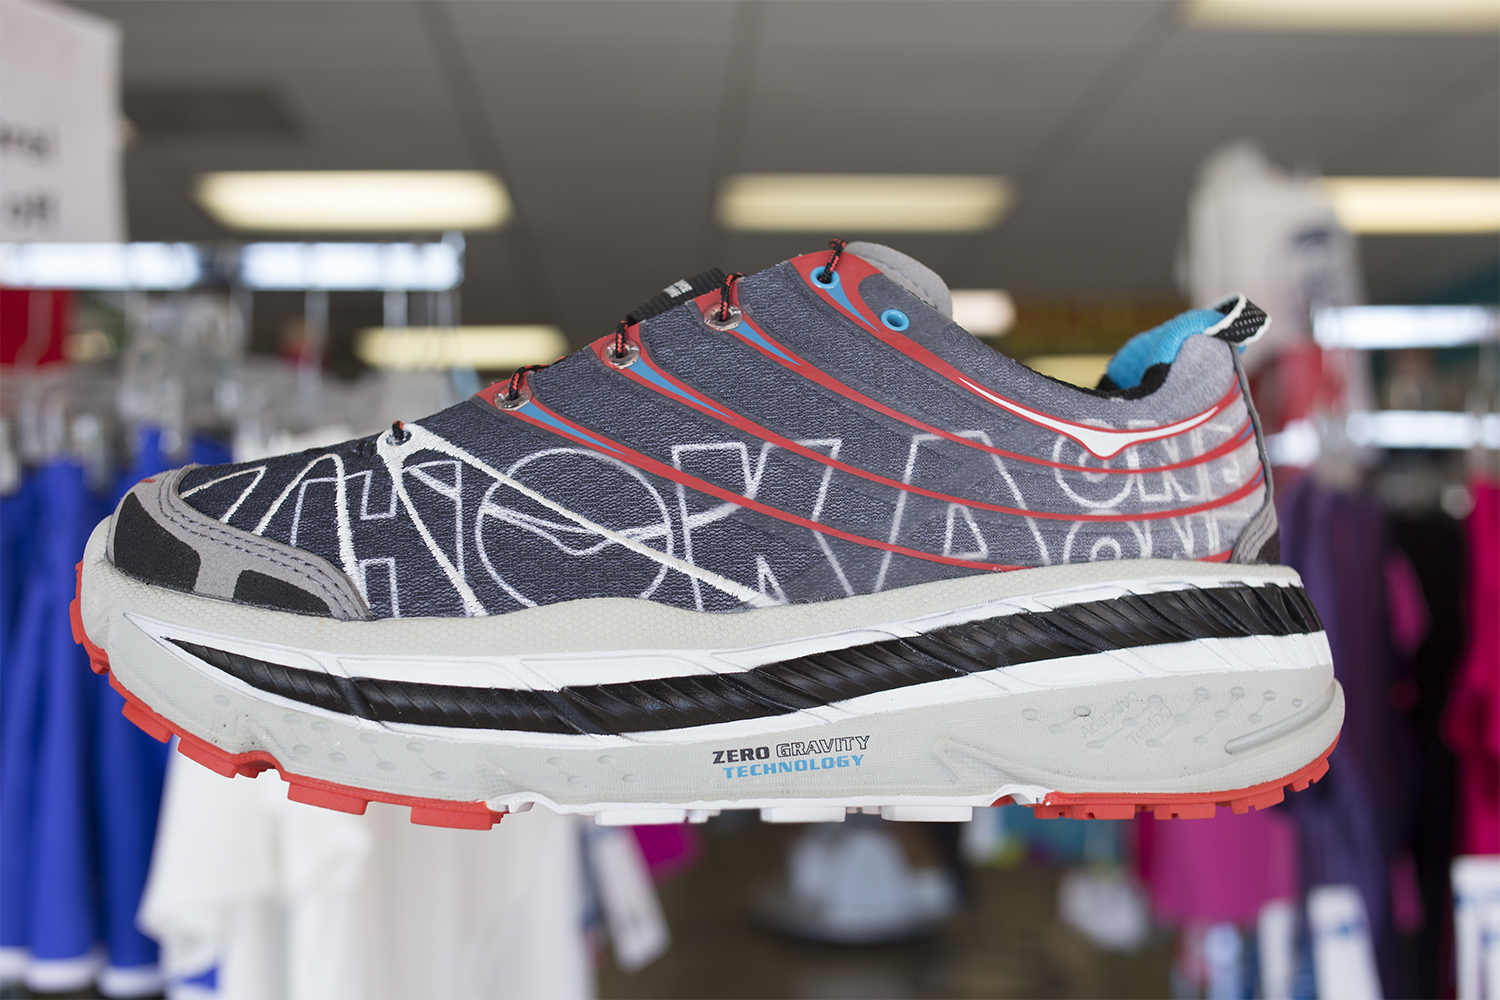 Want to know more about Hoka One One 